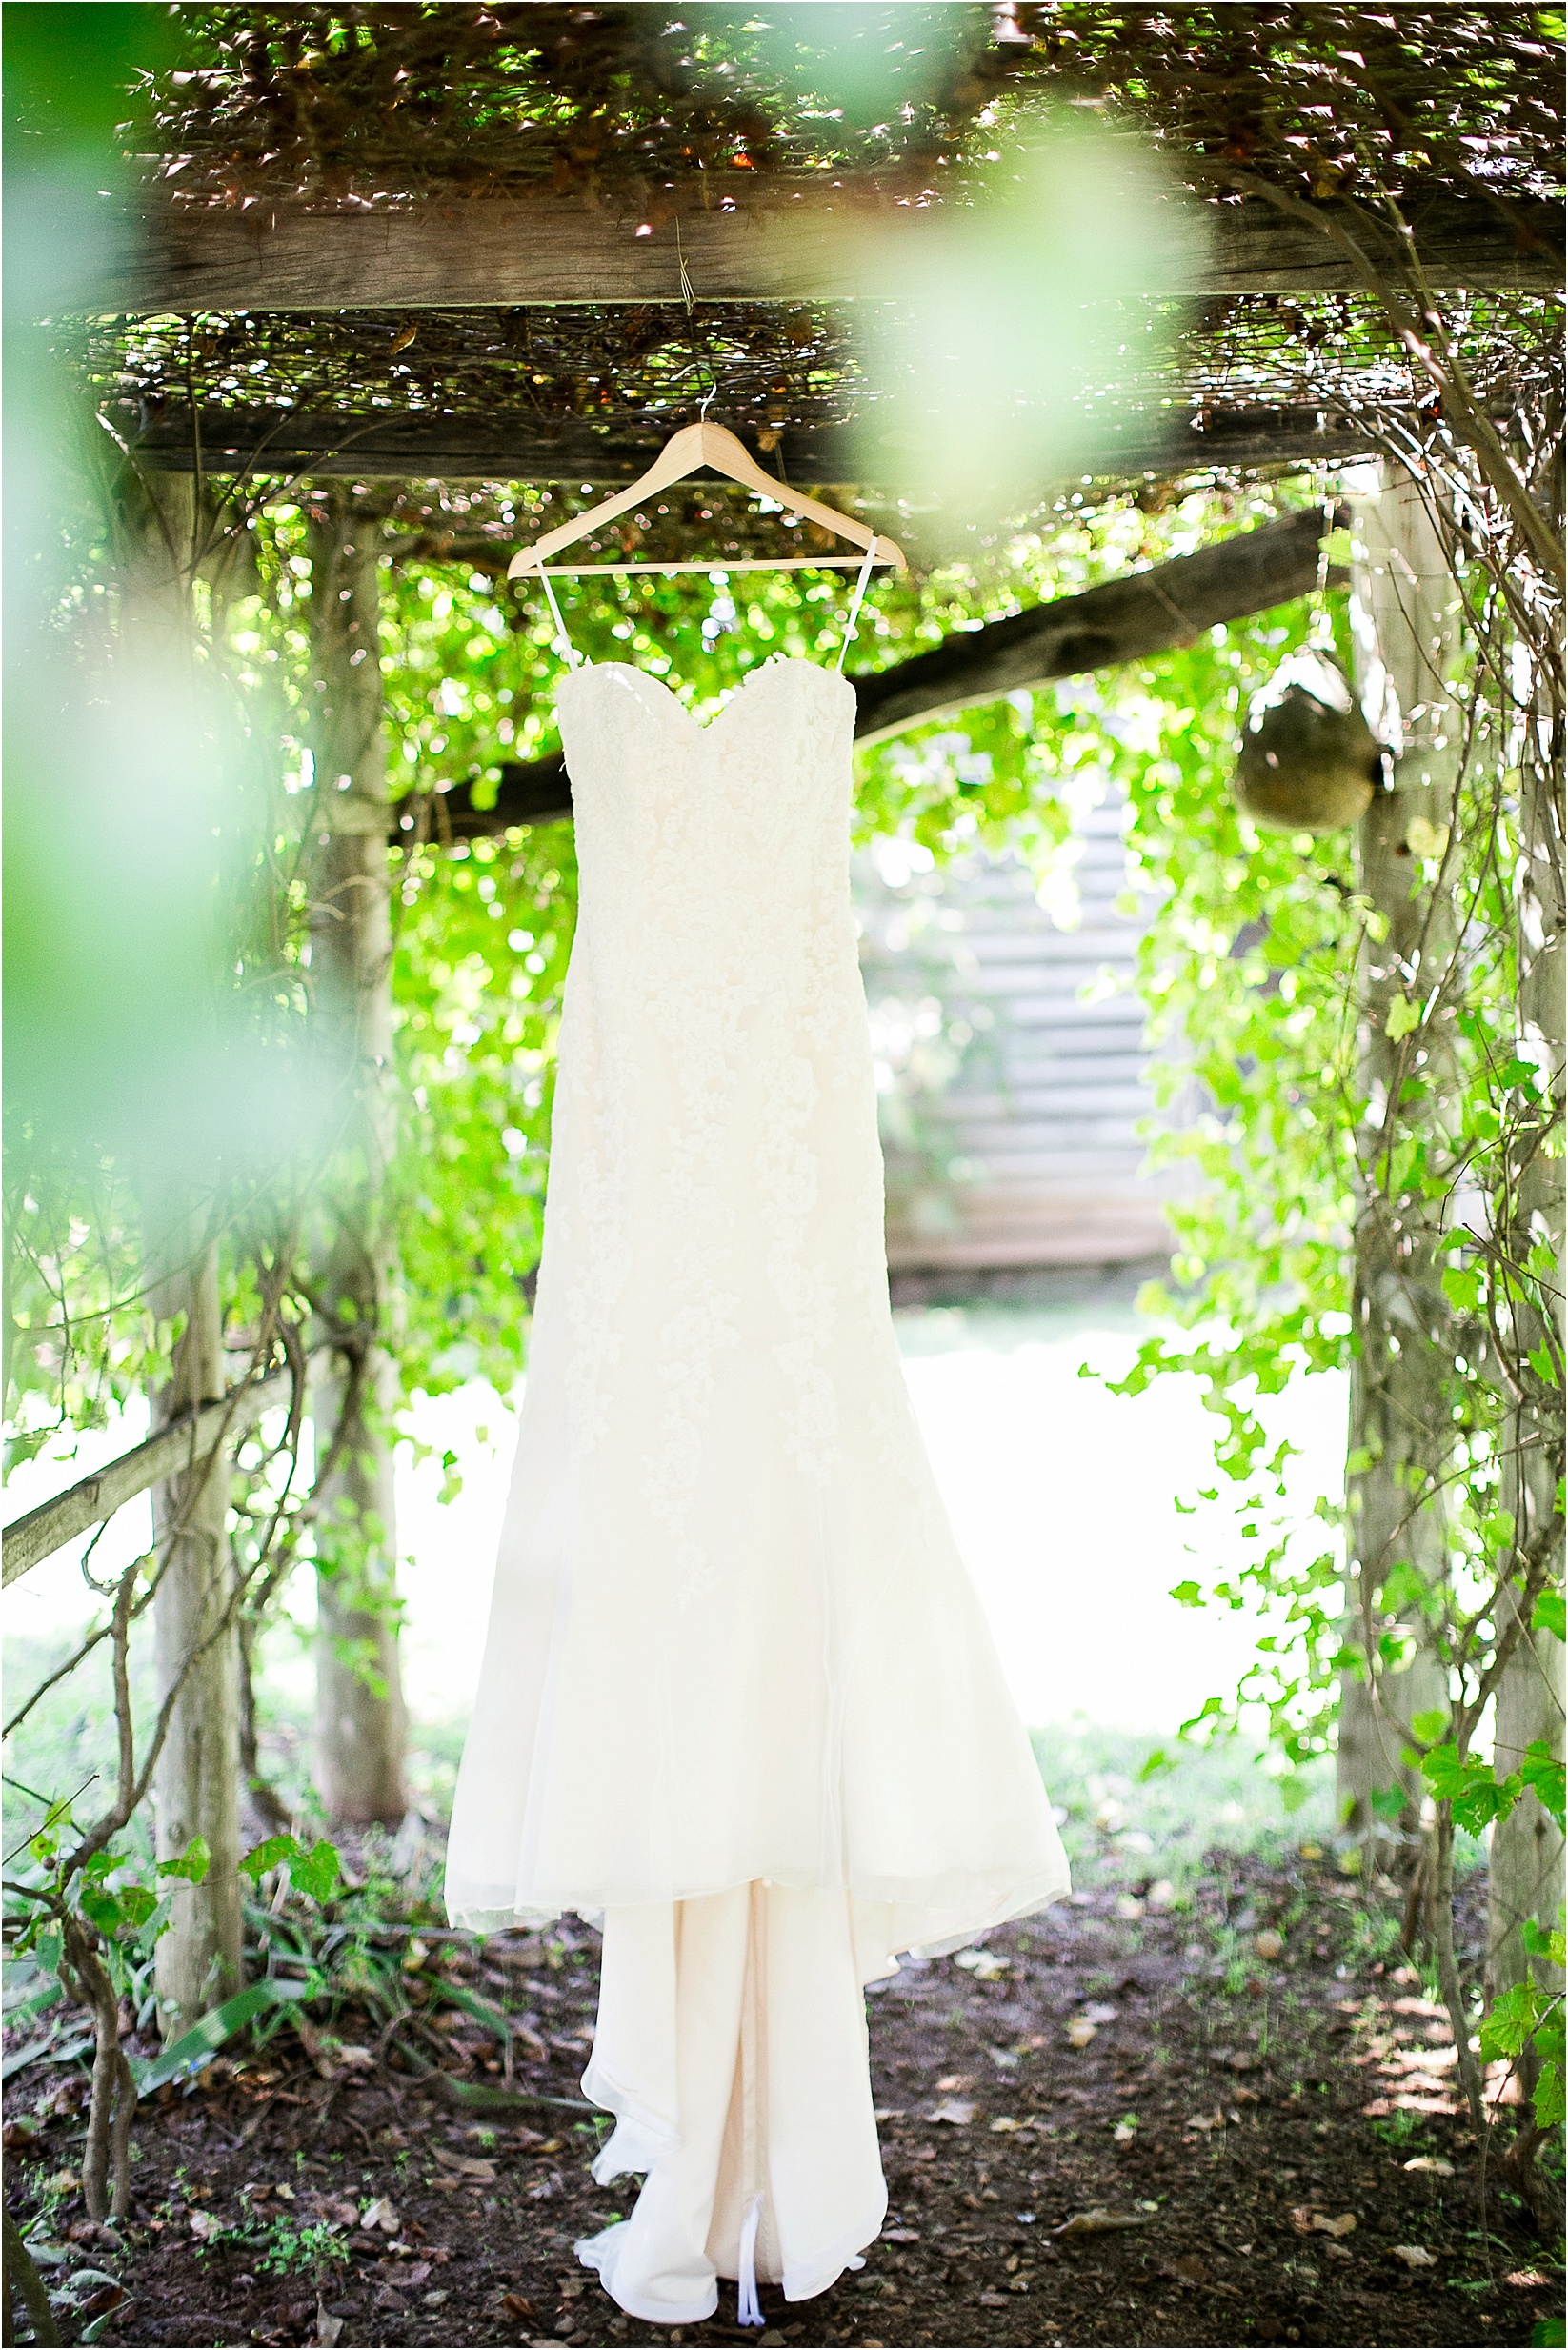 Dress hanging up during their wedding at the Historic Rural Hill wedding ceremony and reception in Huntersville nc